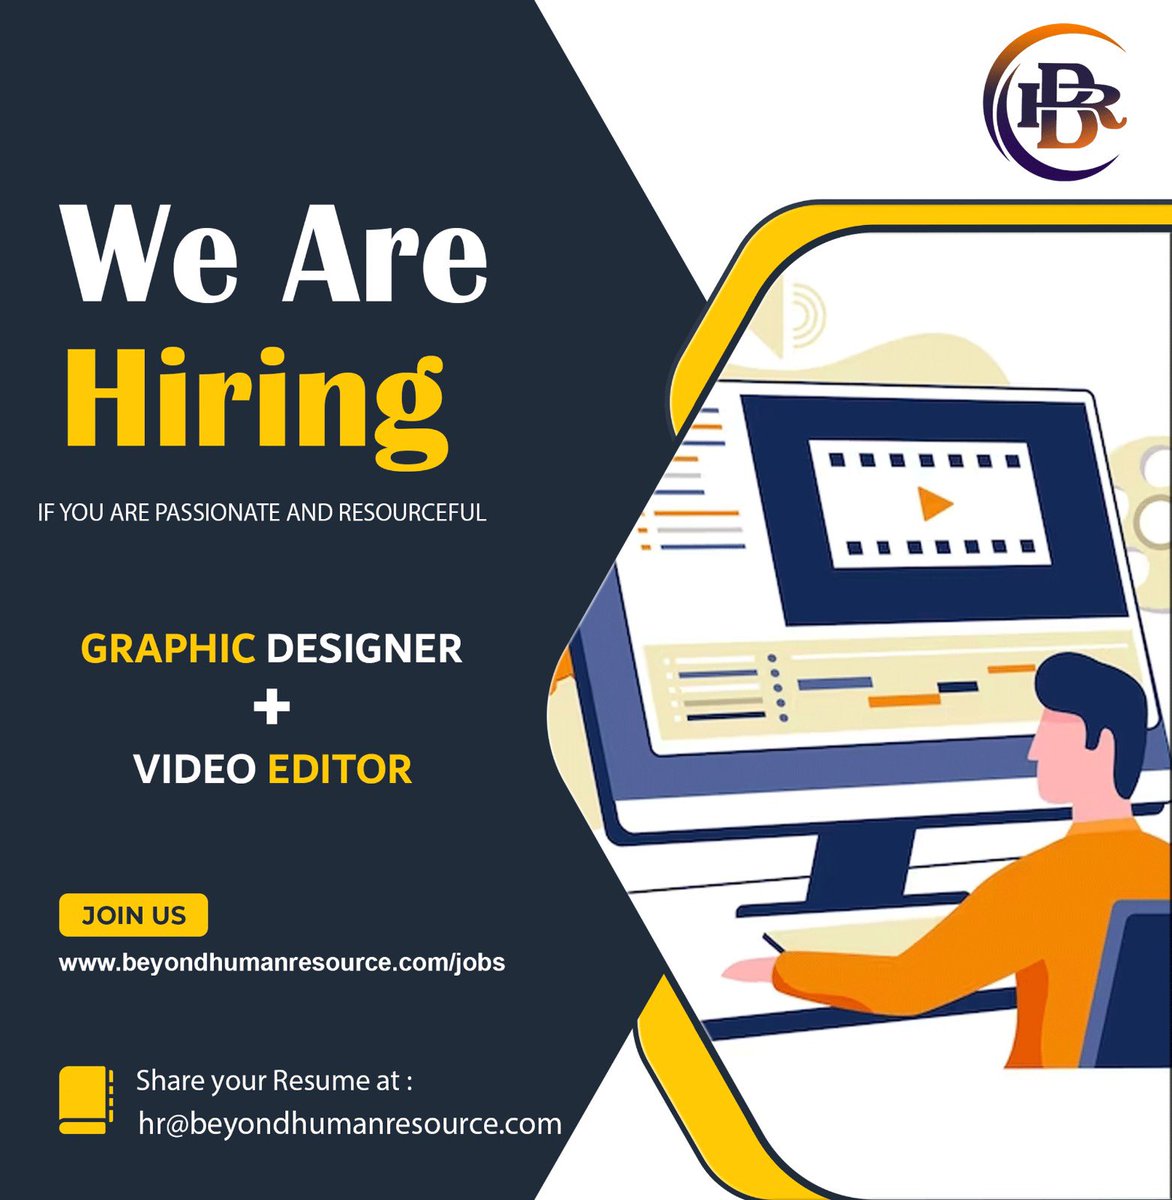 We’re hiring for #Graphic + #Video #Editor for a leading retail brand. Someone with 2+ years of experience would be a good match. 

Apply at : beyondhumanresource.com/jobs/graphic-d…

#hiring #opentoworkwithBHR #lookingtoworkwithbhr #hiringforbhr #retail #brand #experience